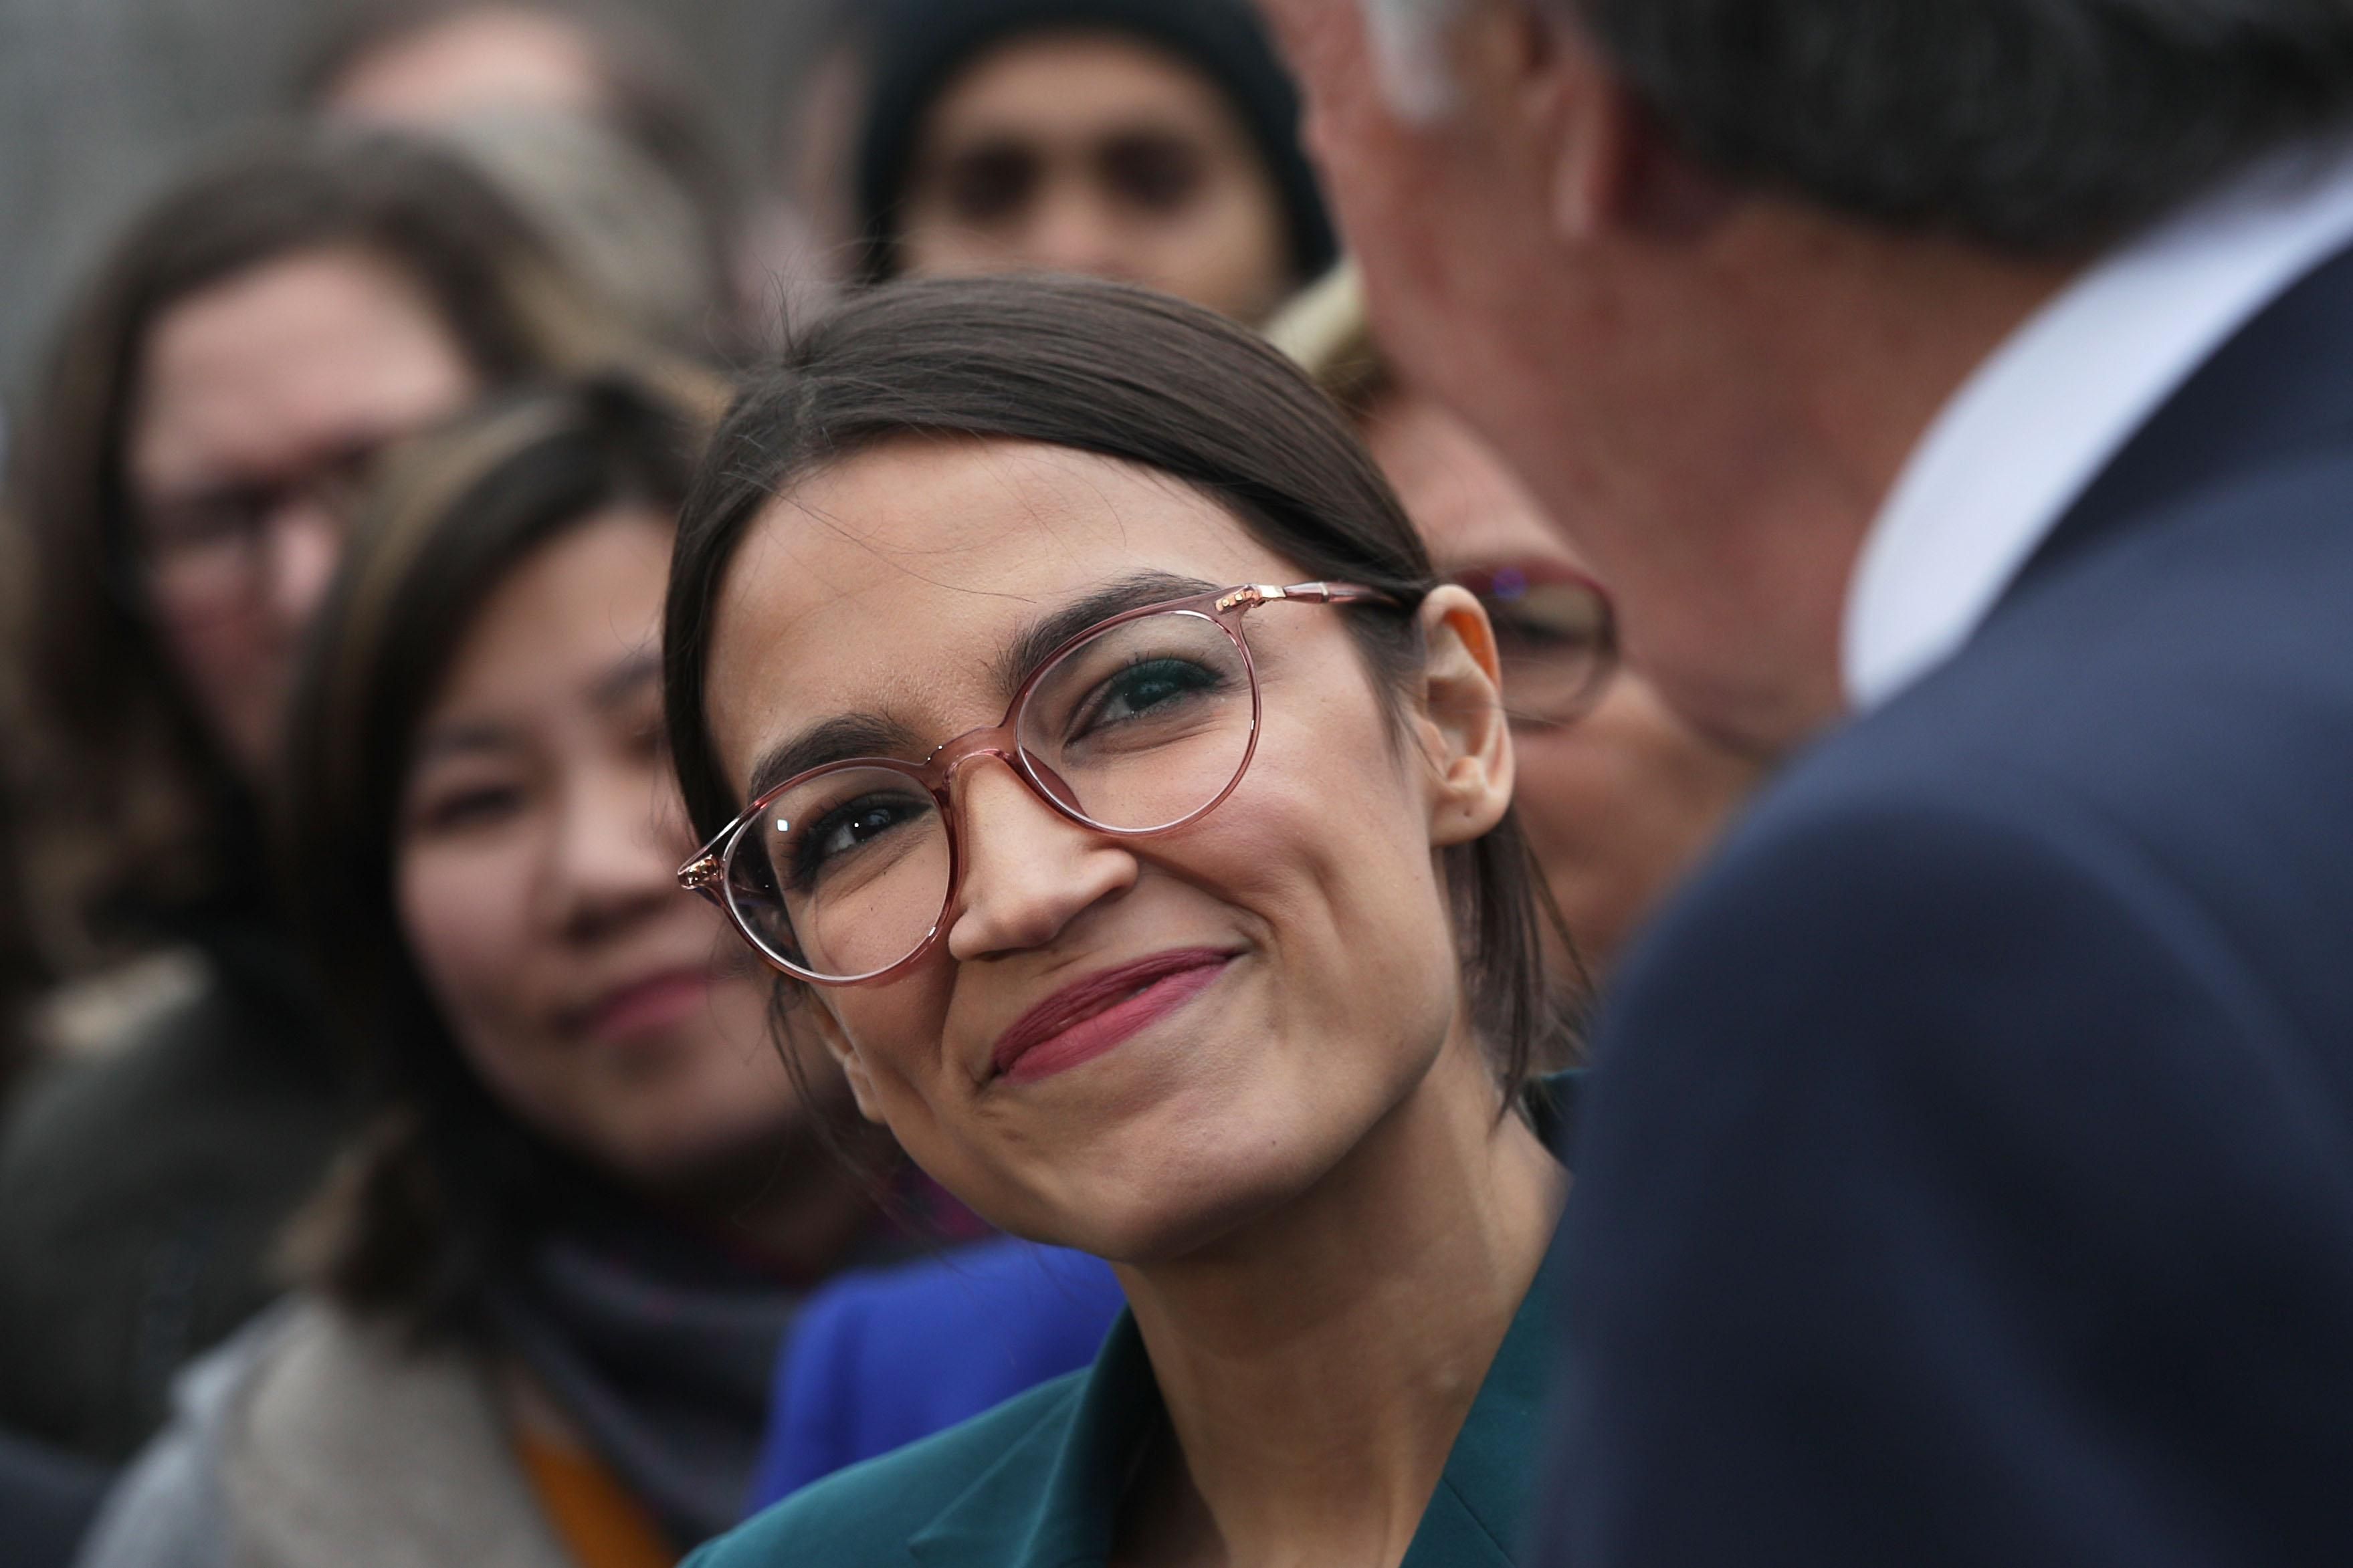 U.S. Rep. Alexandria Ocasio-Cortez (D-NY) during a news conference in front of the U.S. Capitol February 7, 2019 in Washington, DC. Sen. Markey and Rep. Ocasio-Cortez held a news conference to unveil their Green New Deal resolution. (Photo: Alex Wong/Getty Images)